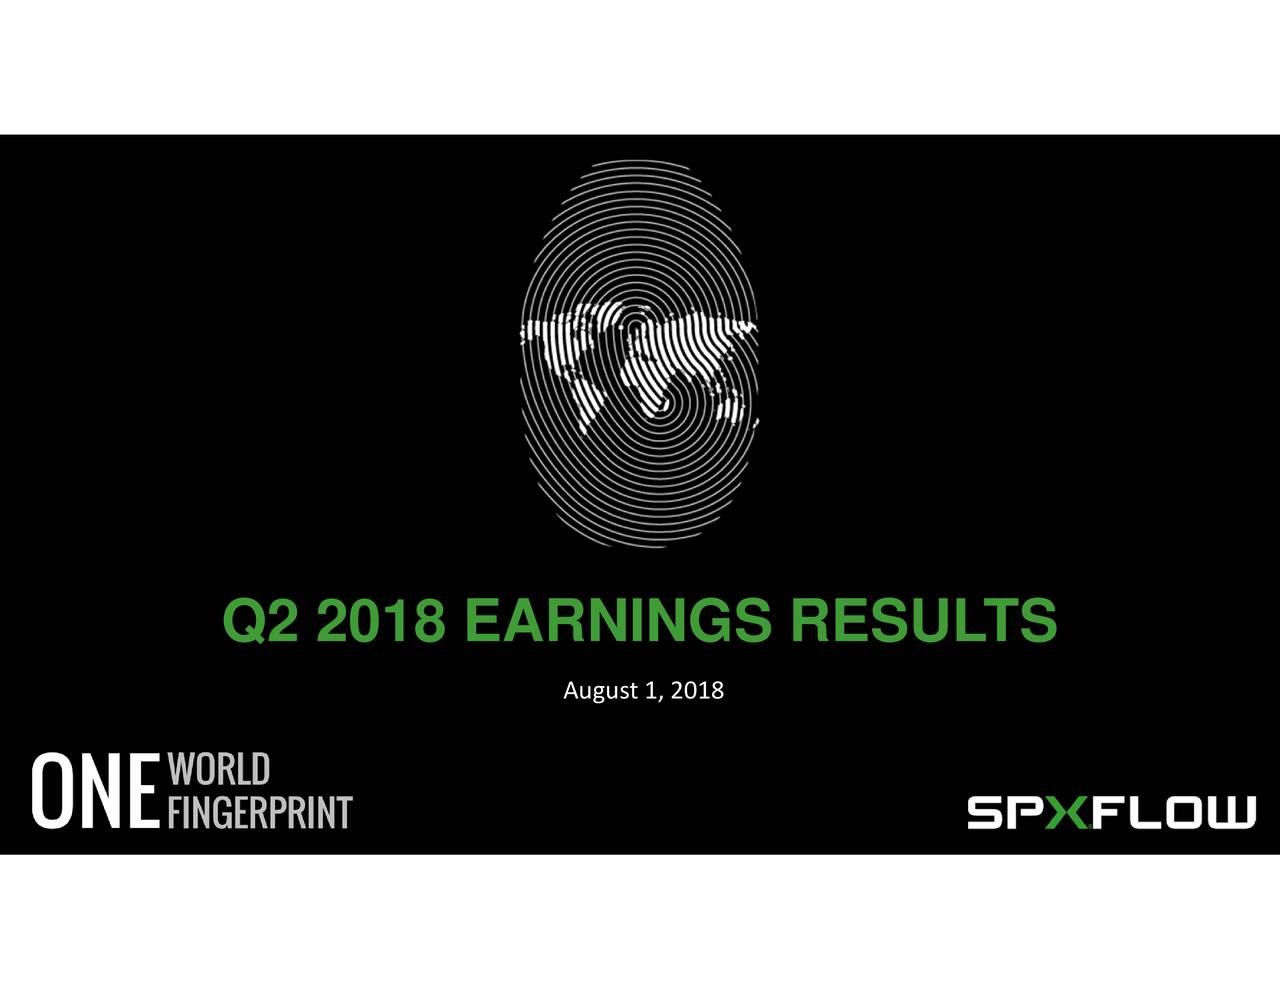 Q2 2018 EARNINGS RESULTS